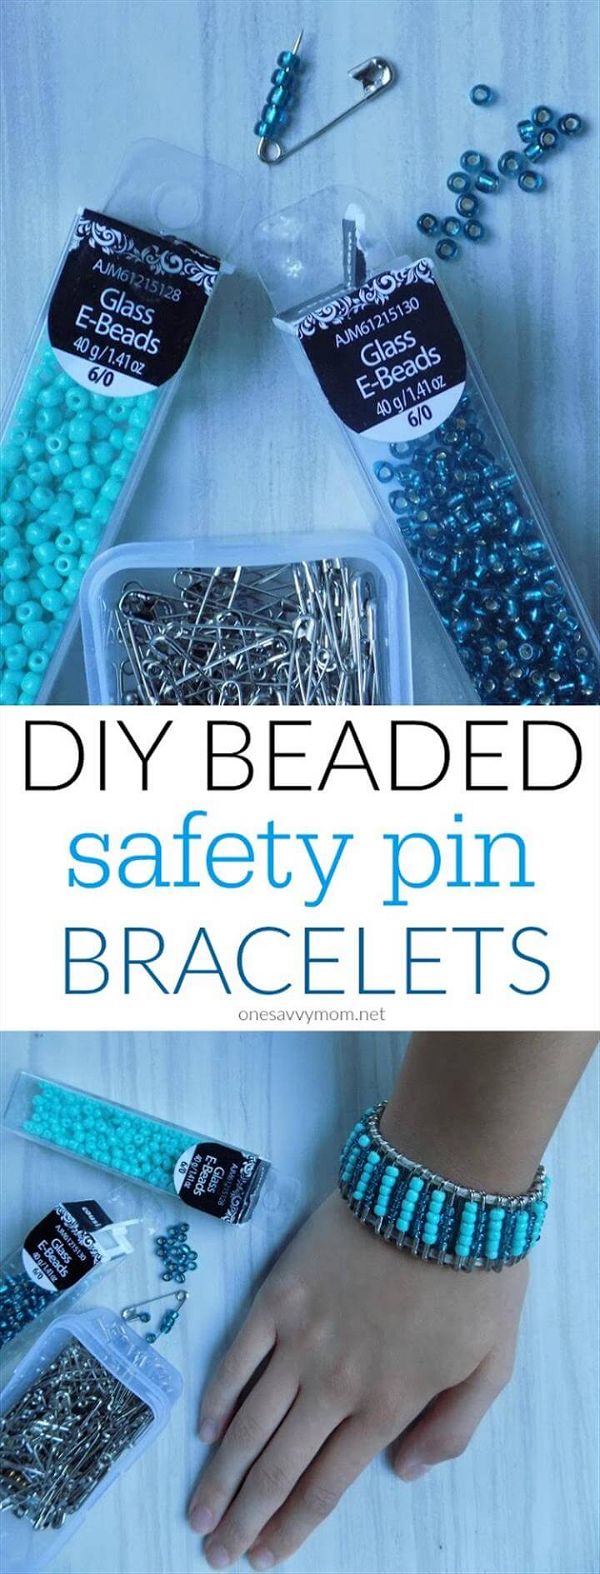  DIY Beaded Safety Pin Bracelets, Diy Jewelry Necklace, Diy Jewelry Rings, Craft Jewelry, Jewelry Making Tutorials, Jewelry Making SuppliesArts And ,Crafts, Crafts For Kids, Tween Craft, Nyc Fashion, Easy Crafts For Teens, Art Projects For Teens, Easy Diy Crafts, Crafts To Make And Sell Easy, Art Ideas For Teens, Best Gifts For Teens, Teen Summer Crafts, Christmas Crafts To Sell Make Money, Craft Ideas For Teen Girls, Fashion 101, Diy Paper, Paper Crafts, Hacks, Mom Blogs, Beaded Jewelry, Jewelry Stand, Copper Jewelry, Wire Jewelry, Safety Pin Bracelet, Safety Pin Jewelry, Crafts For Teens, Tween Craft, Kids Crafts, Safety Pin Crafts, Craft Jewelry, Jewelry Ideas, Jewelry Making,